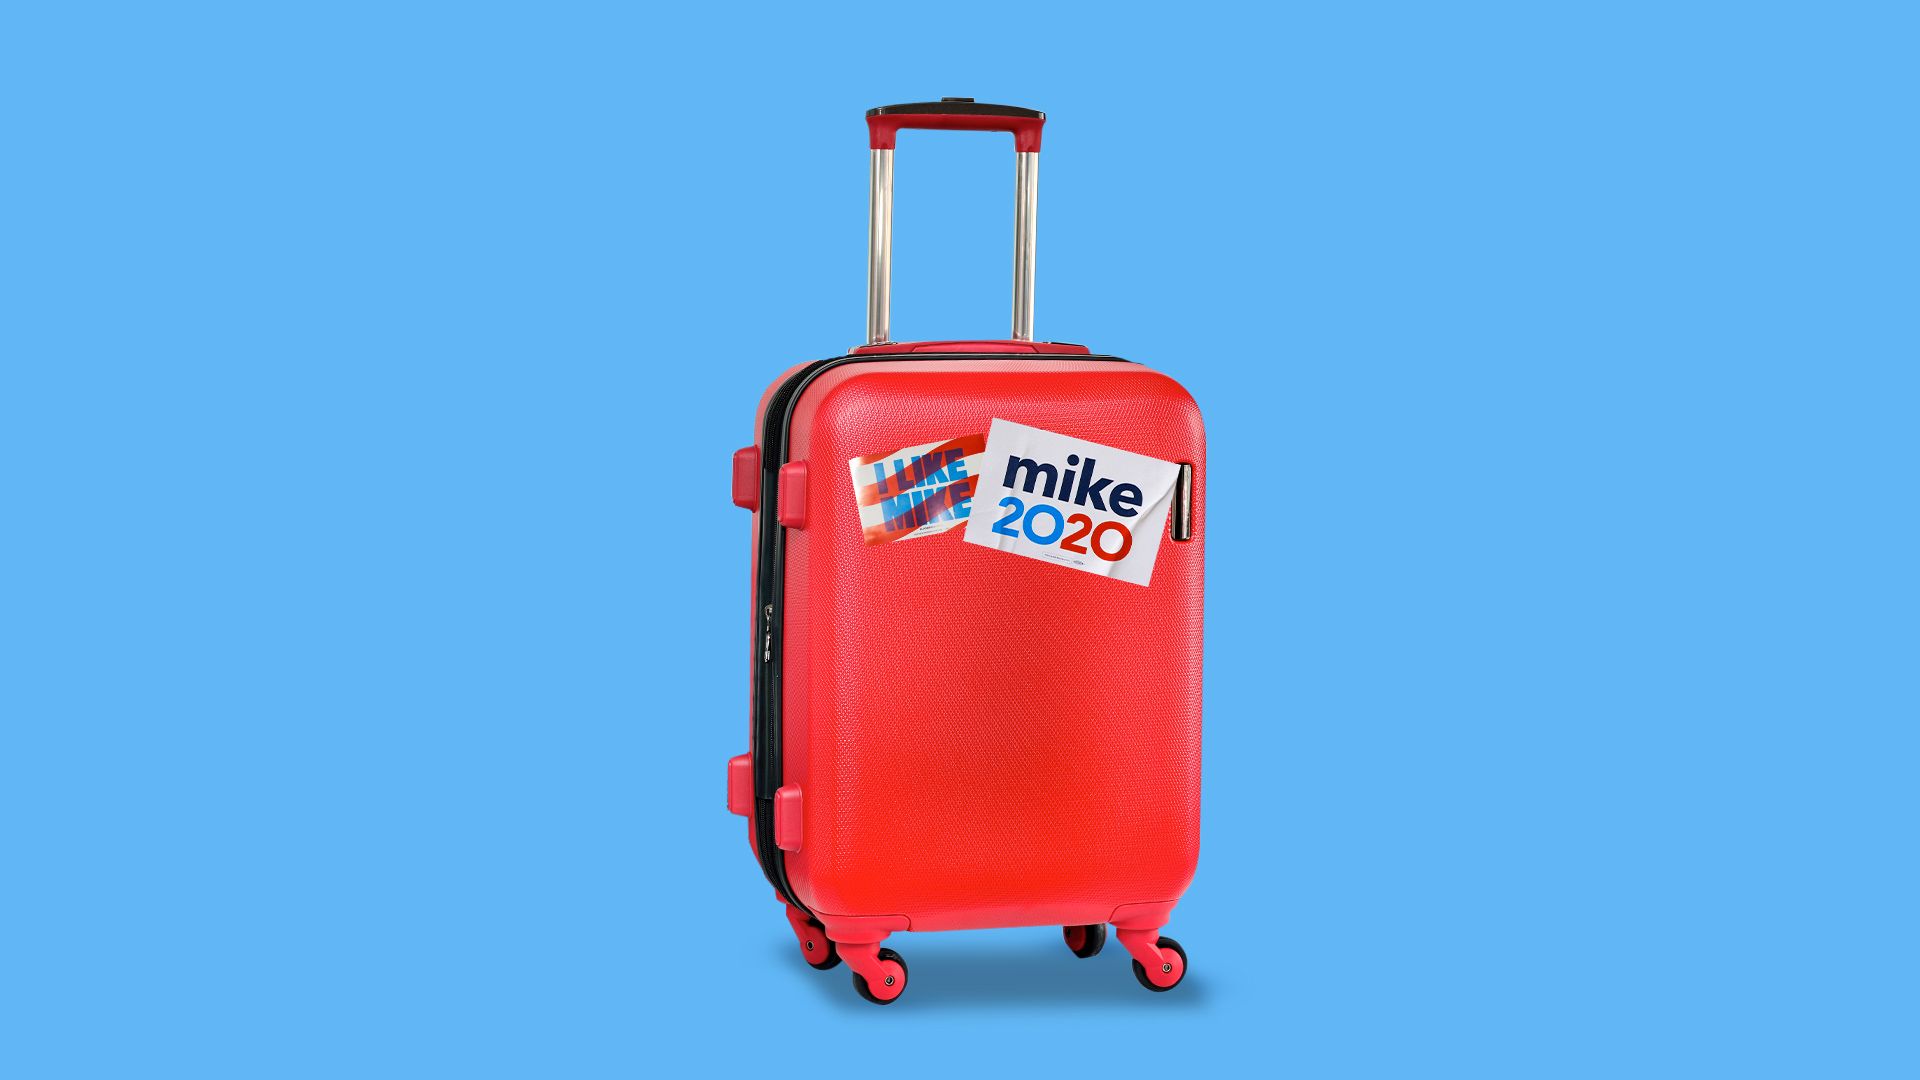 Illustration of a suitcase with a Mike 2020 and I Like Mike sticker on it.